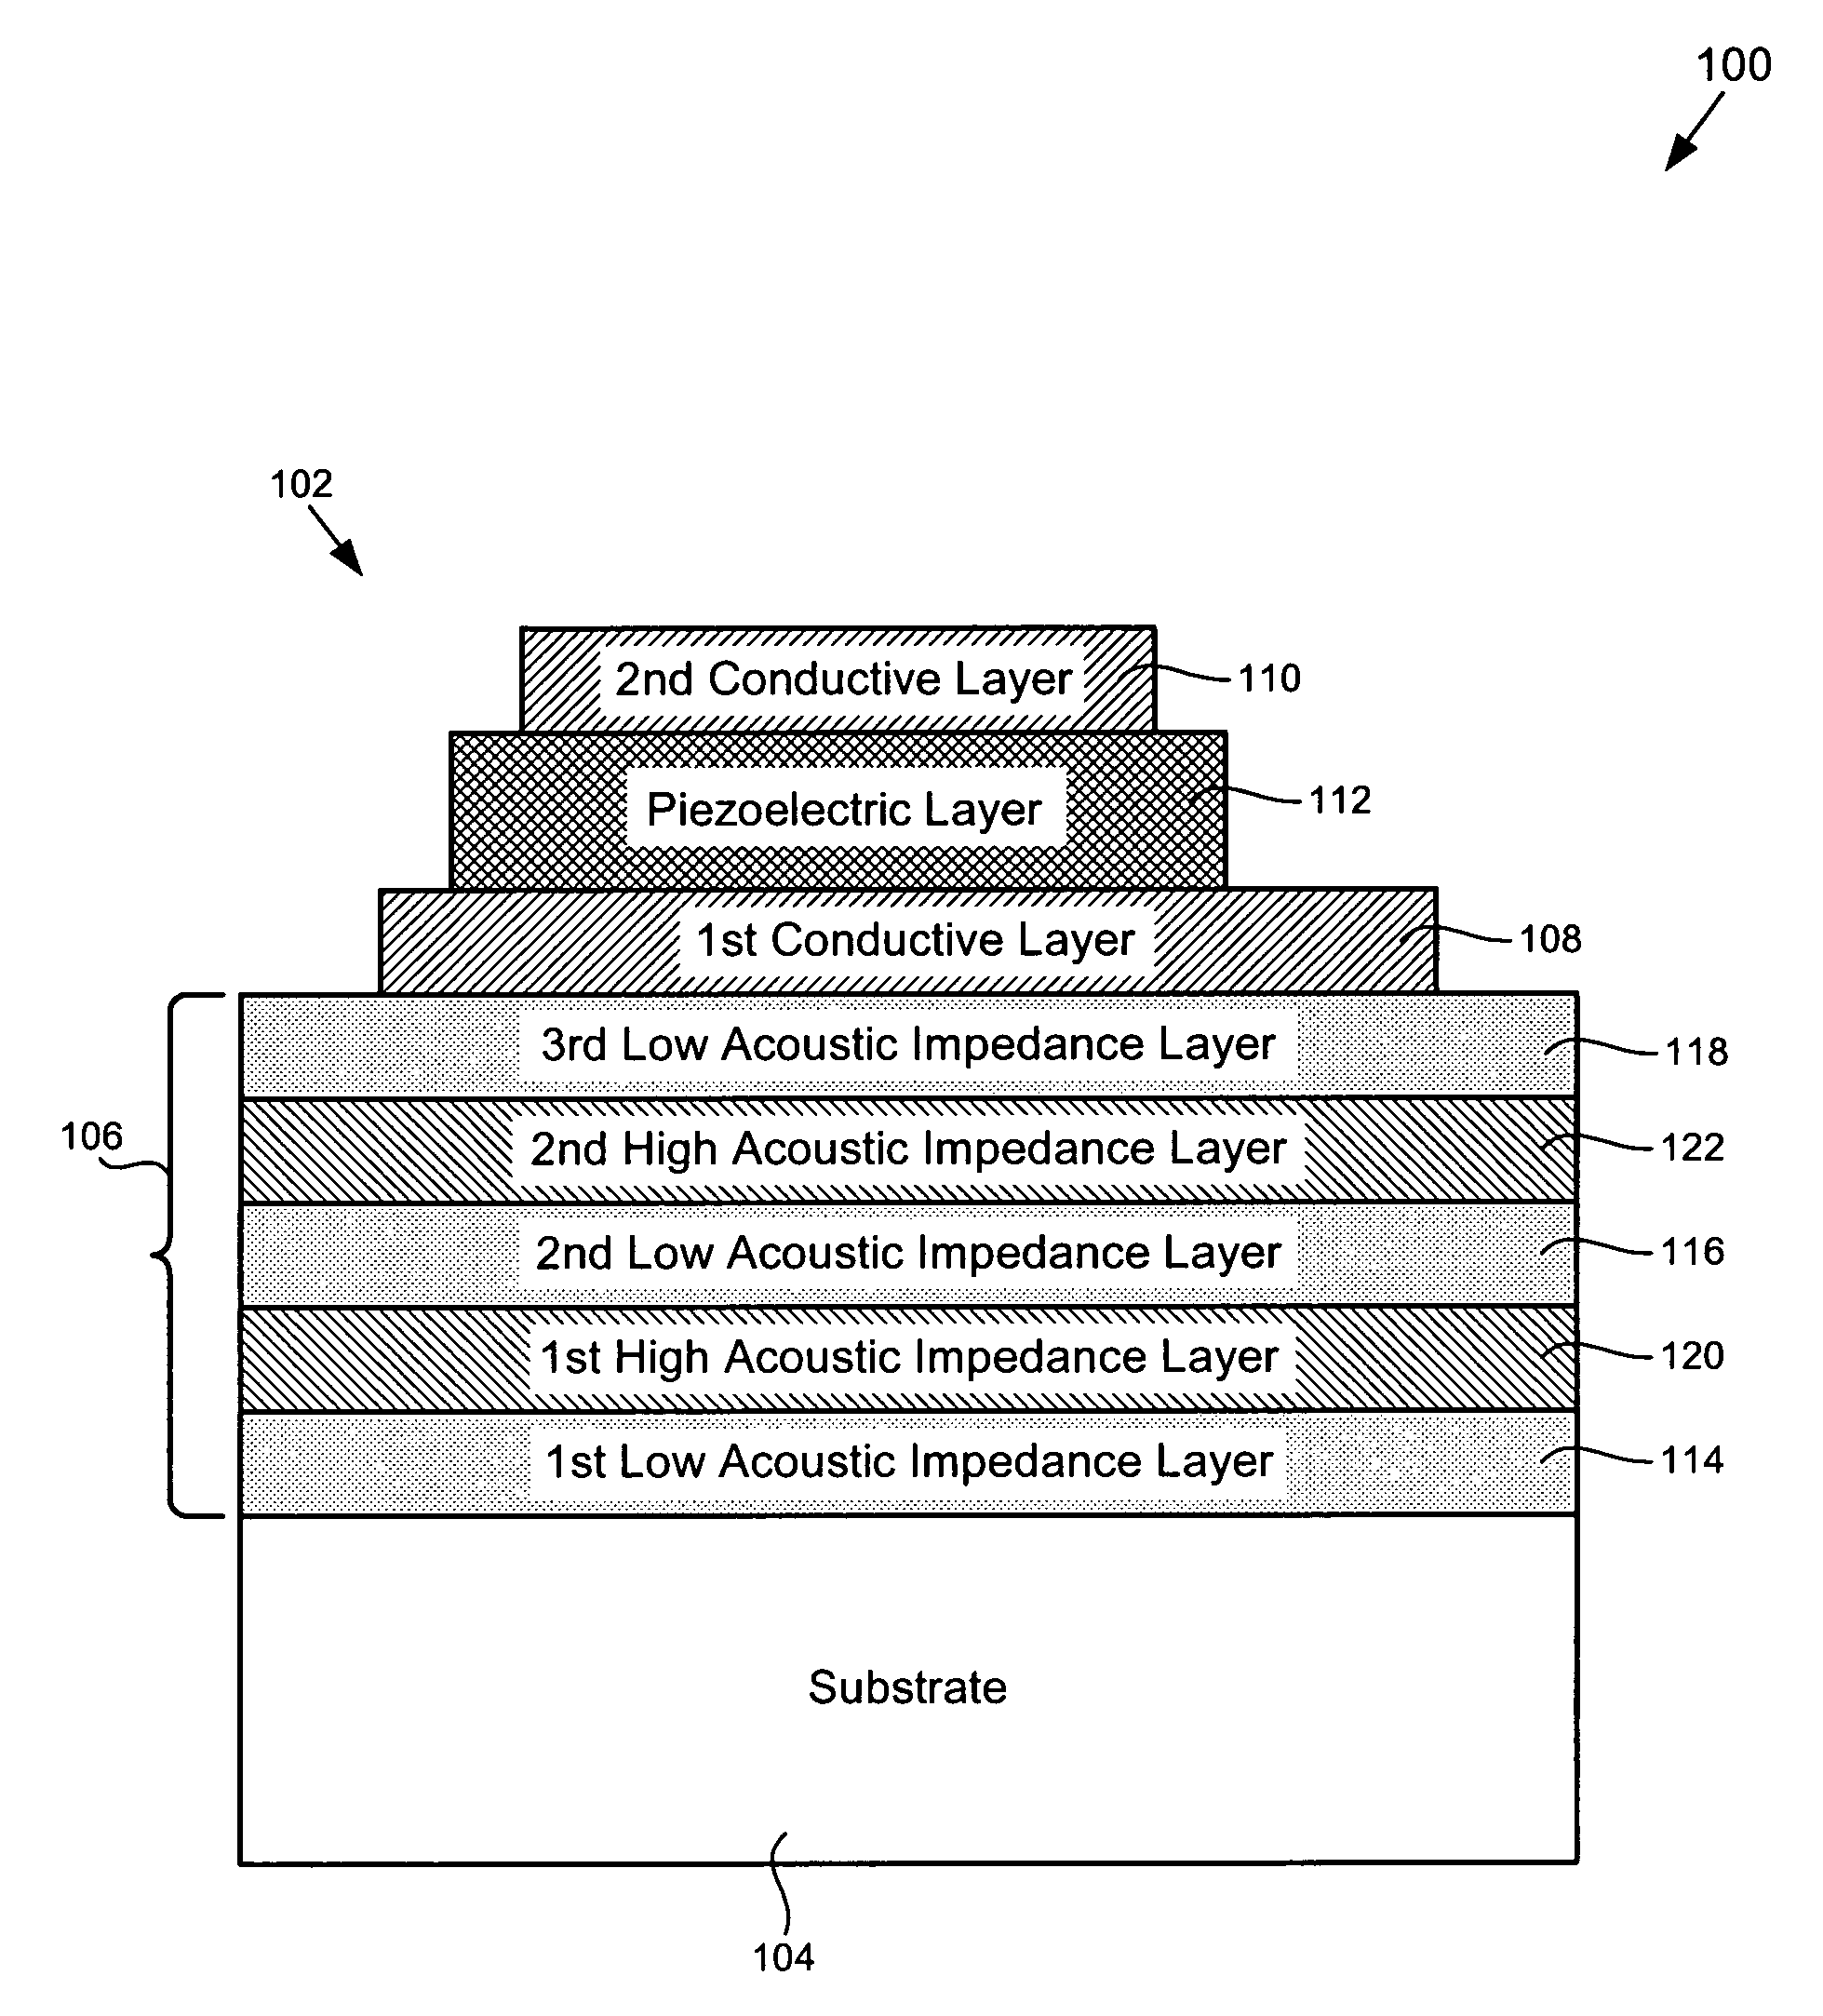 Acoustic mirror structure for a bulk acoustic wave structure and method for fabricating same